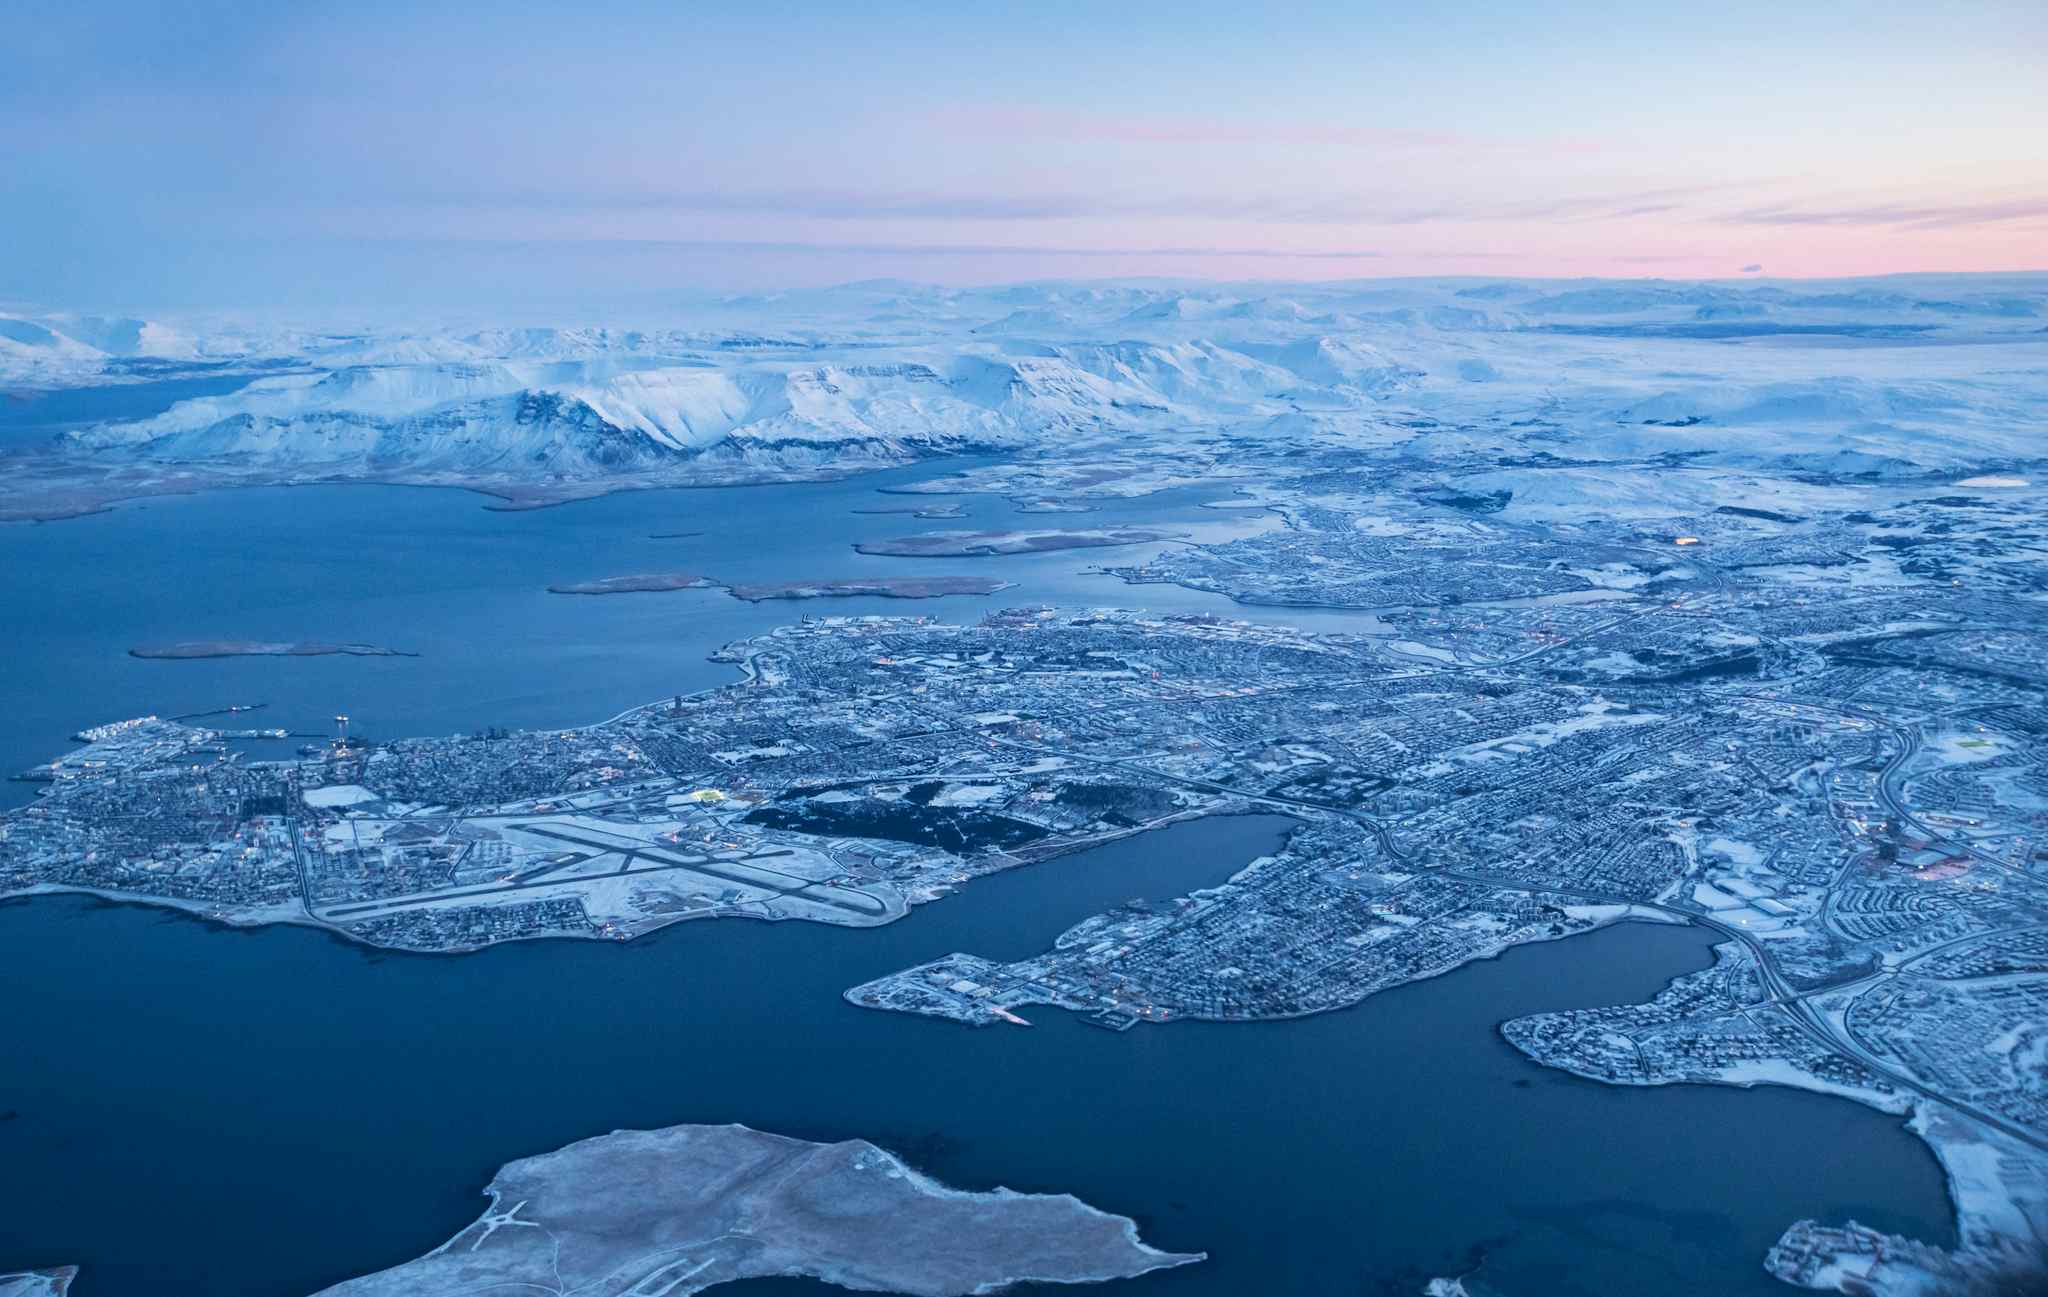 View of Keflavik city in winter through airplane window, Iceland. Photo: GettyImages-900699846